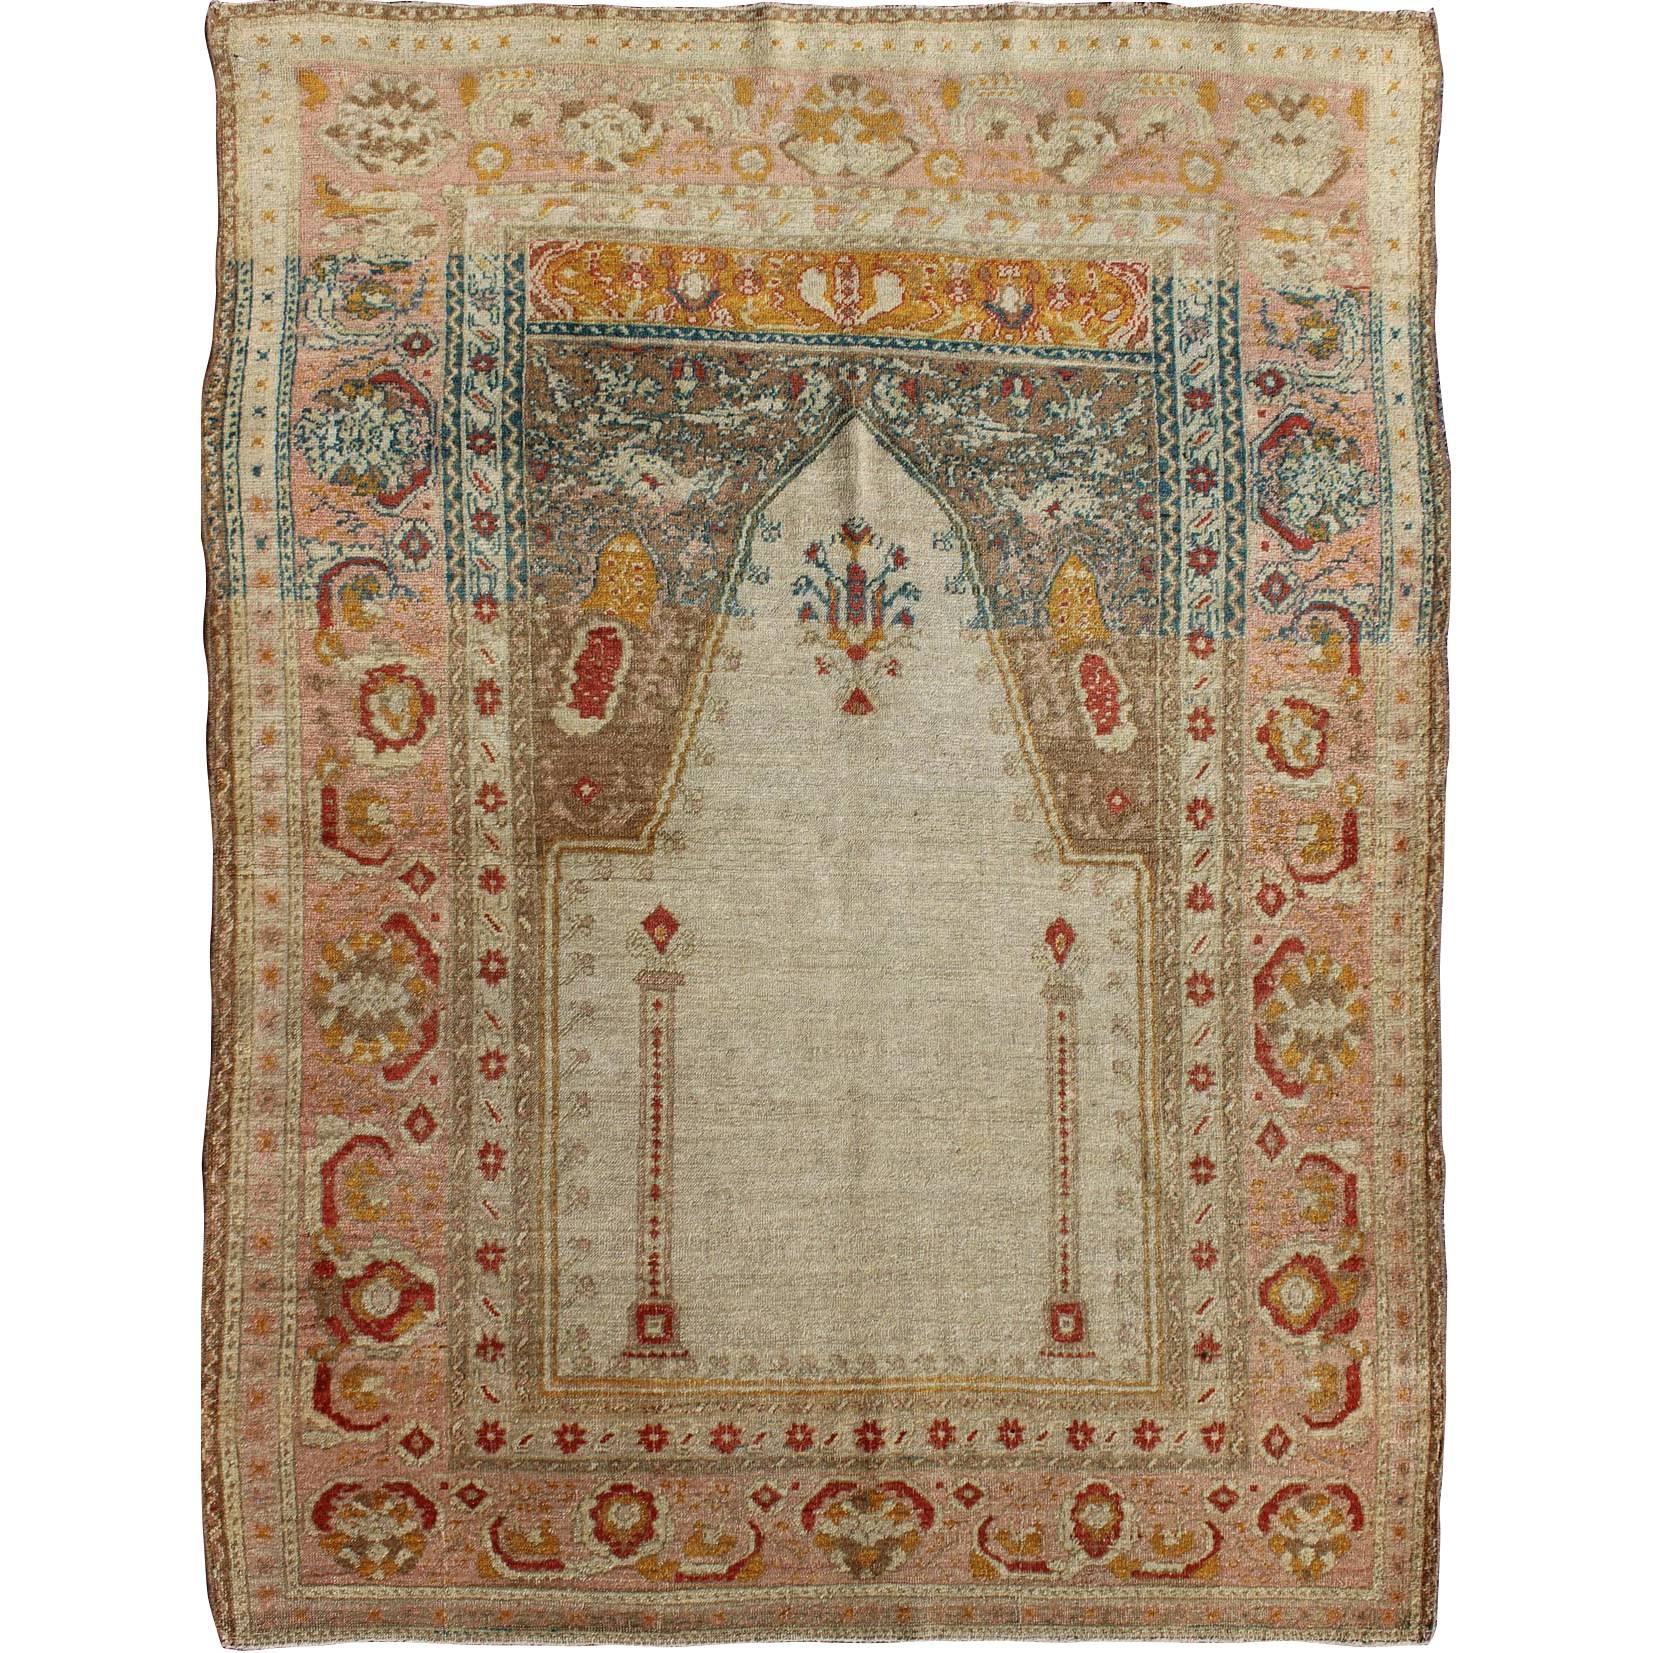 Antique Turkish Sivas Prayer Rug with Floral Design in Ivory, Taupe, and Pink